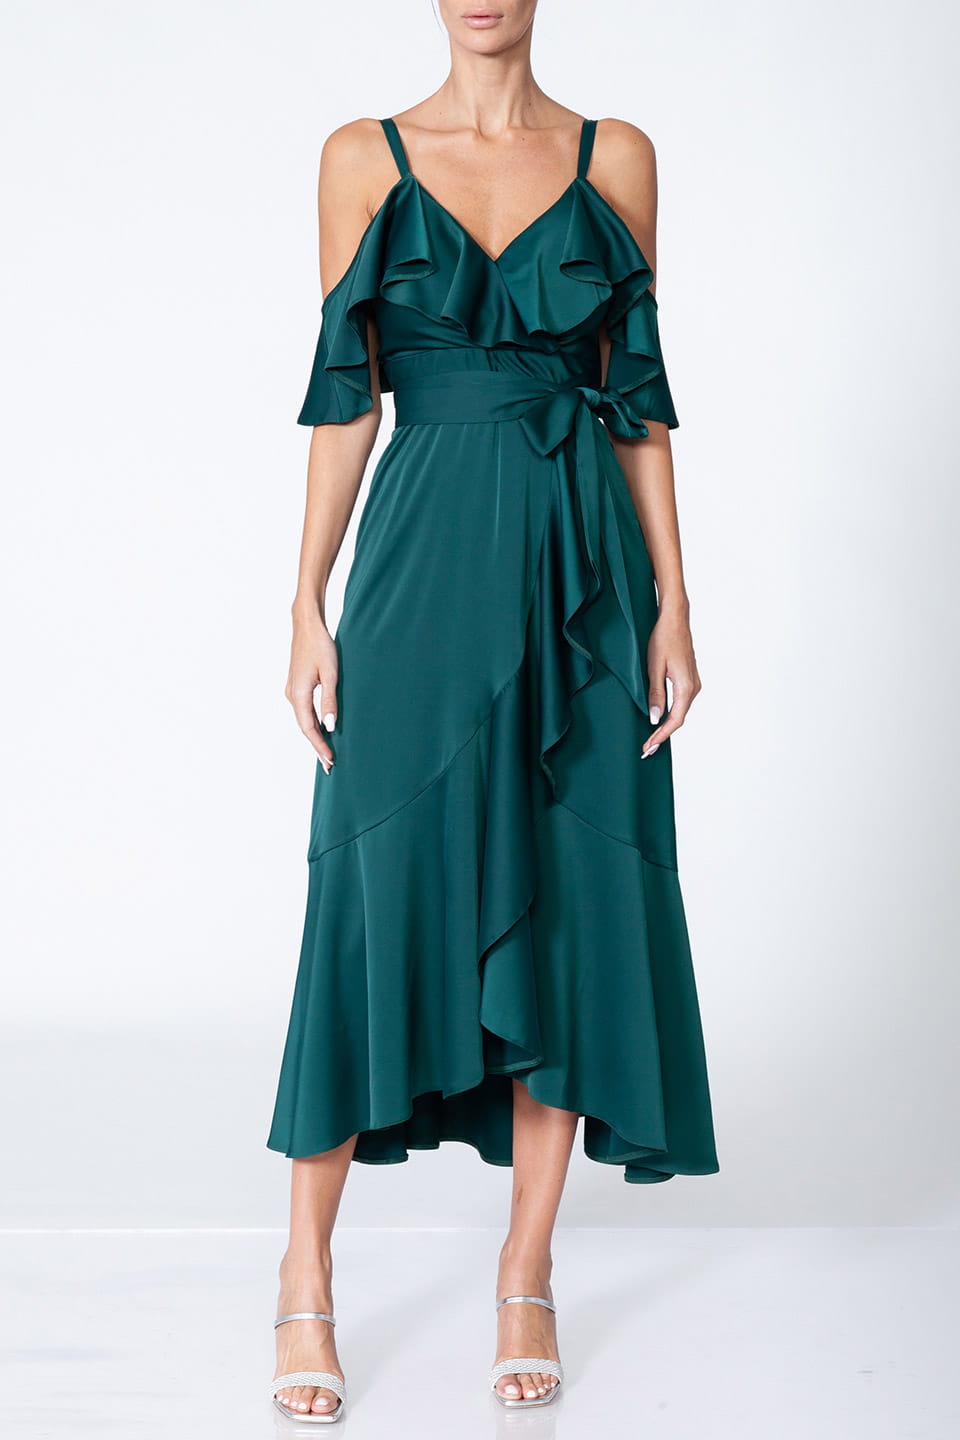 Thumbnail for Product gallery 1, Anze thea dress emerald main